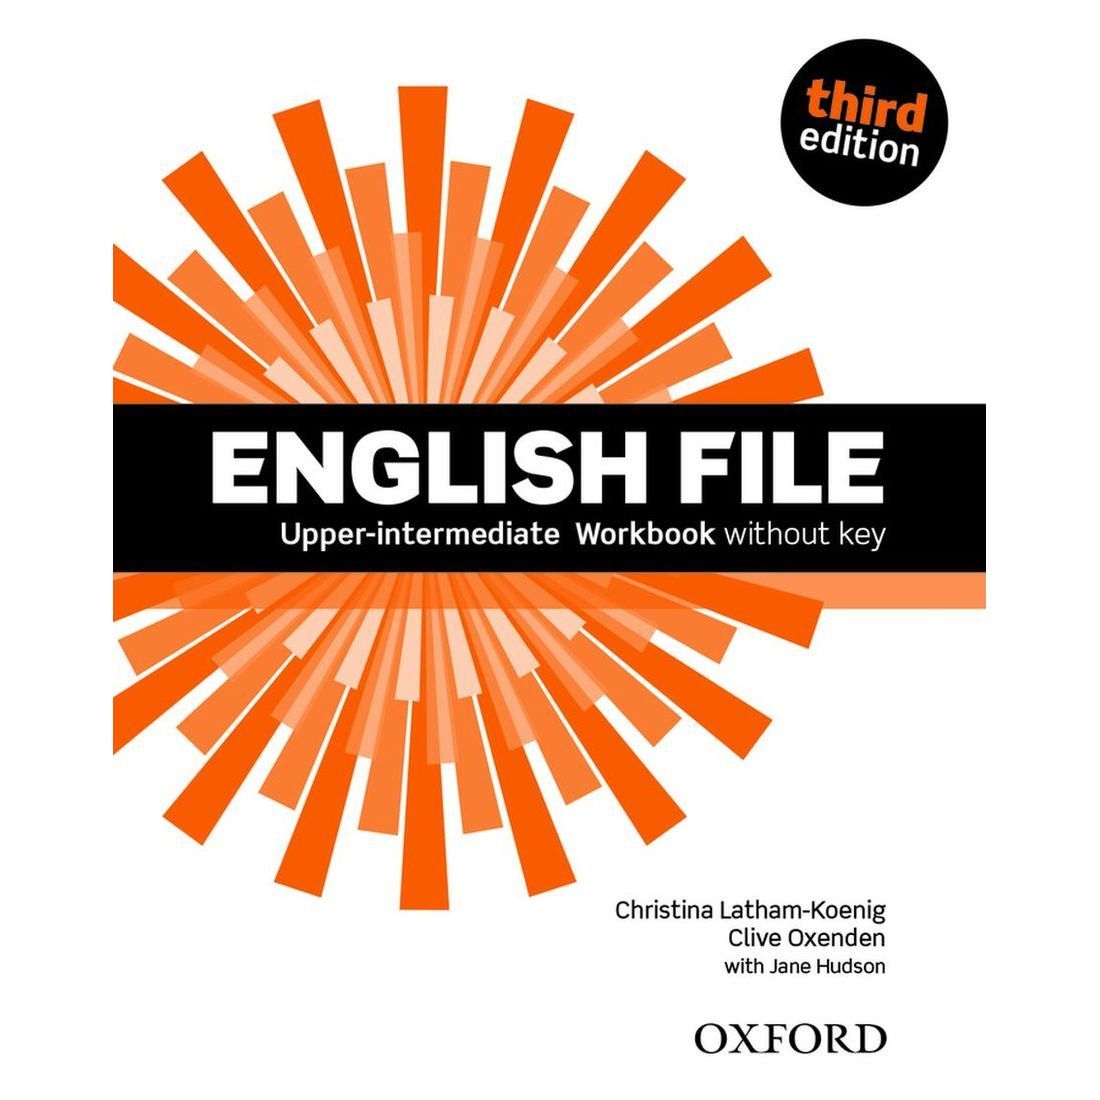 English file Elementary 3rd Edition. New English file Elementary Test Audio. English file Elementary third Edition. New English file Elementary teacher's book. English file upper intermediate student